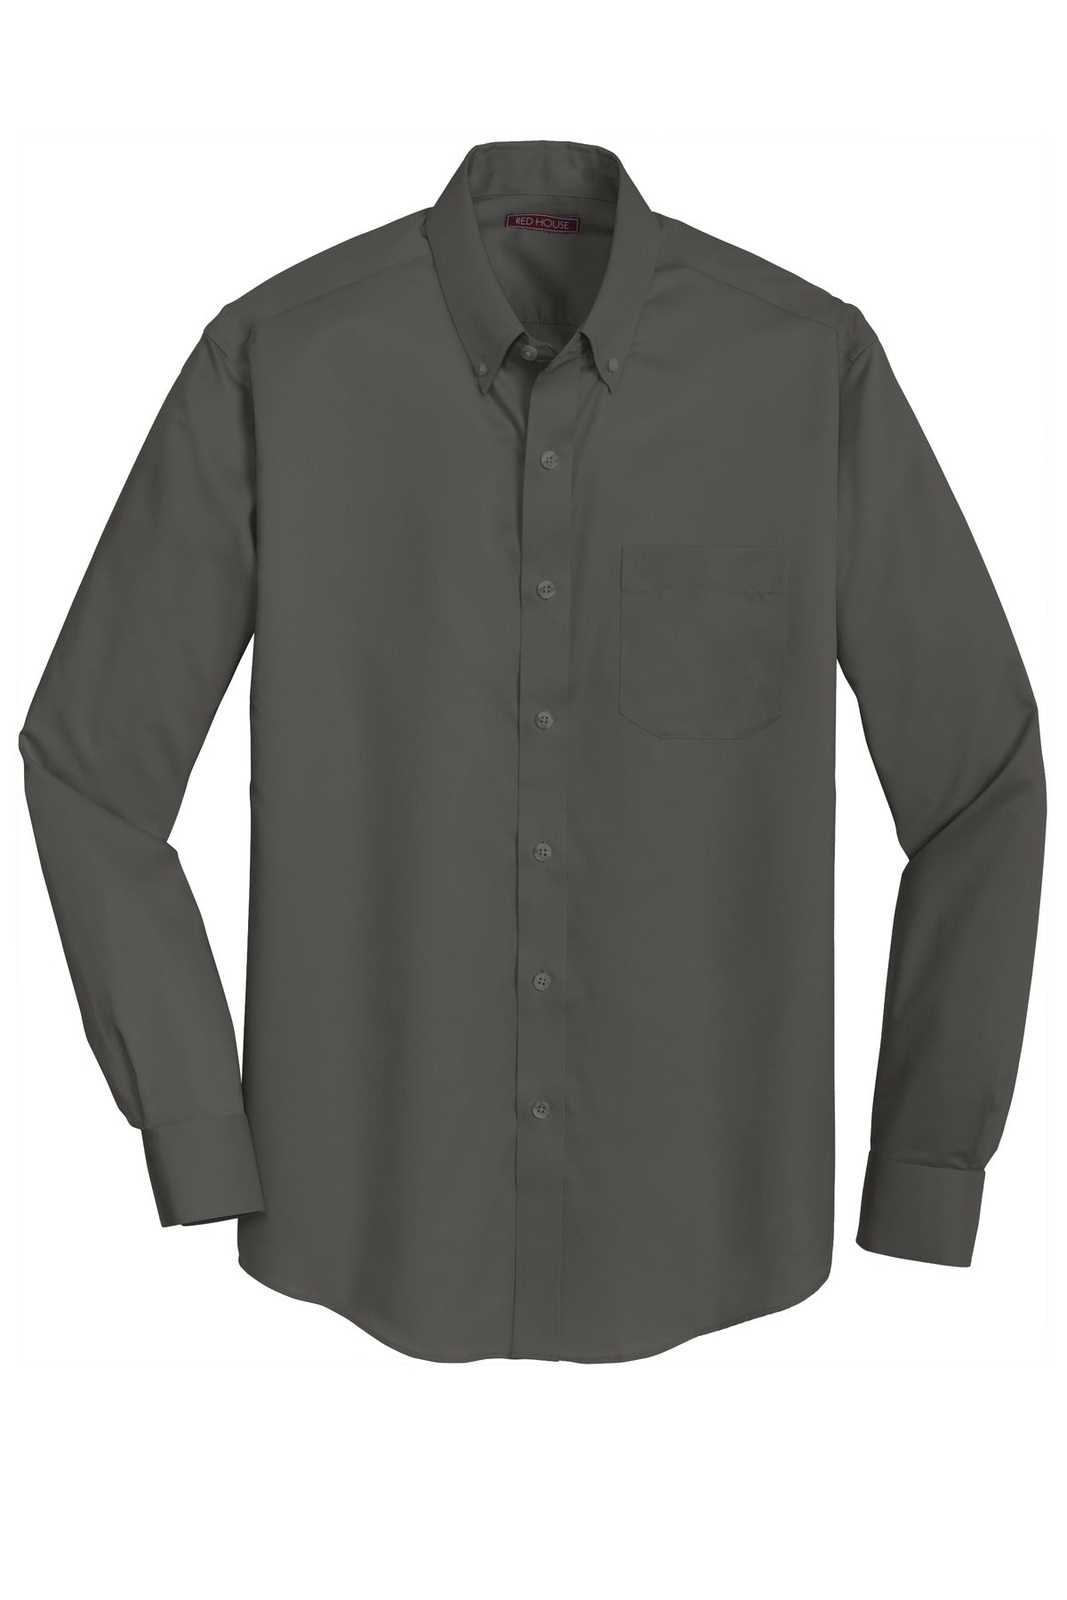 Red House RH78 Non-Iron Twill Shirt - Gray Steel - HIT a Double - 5